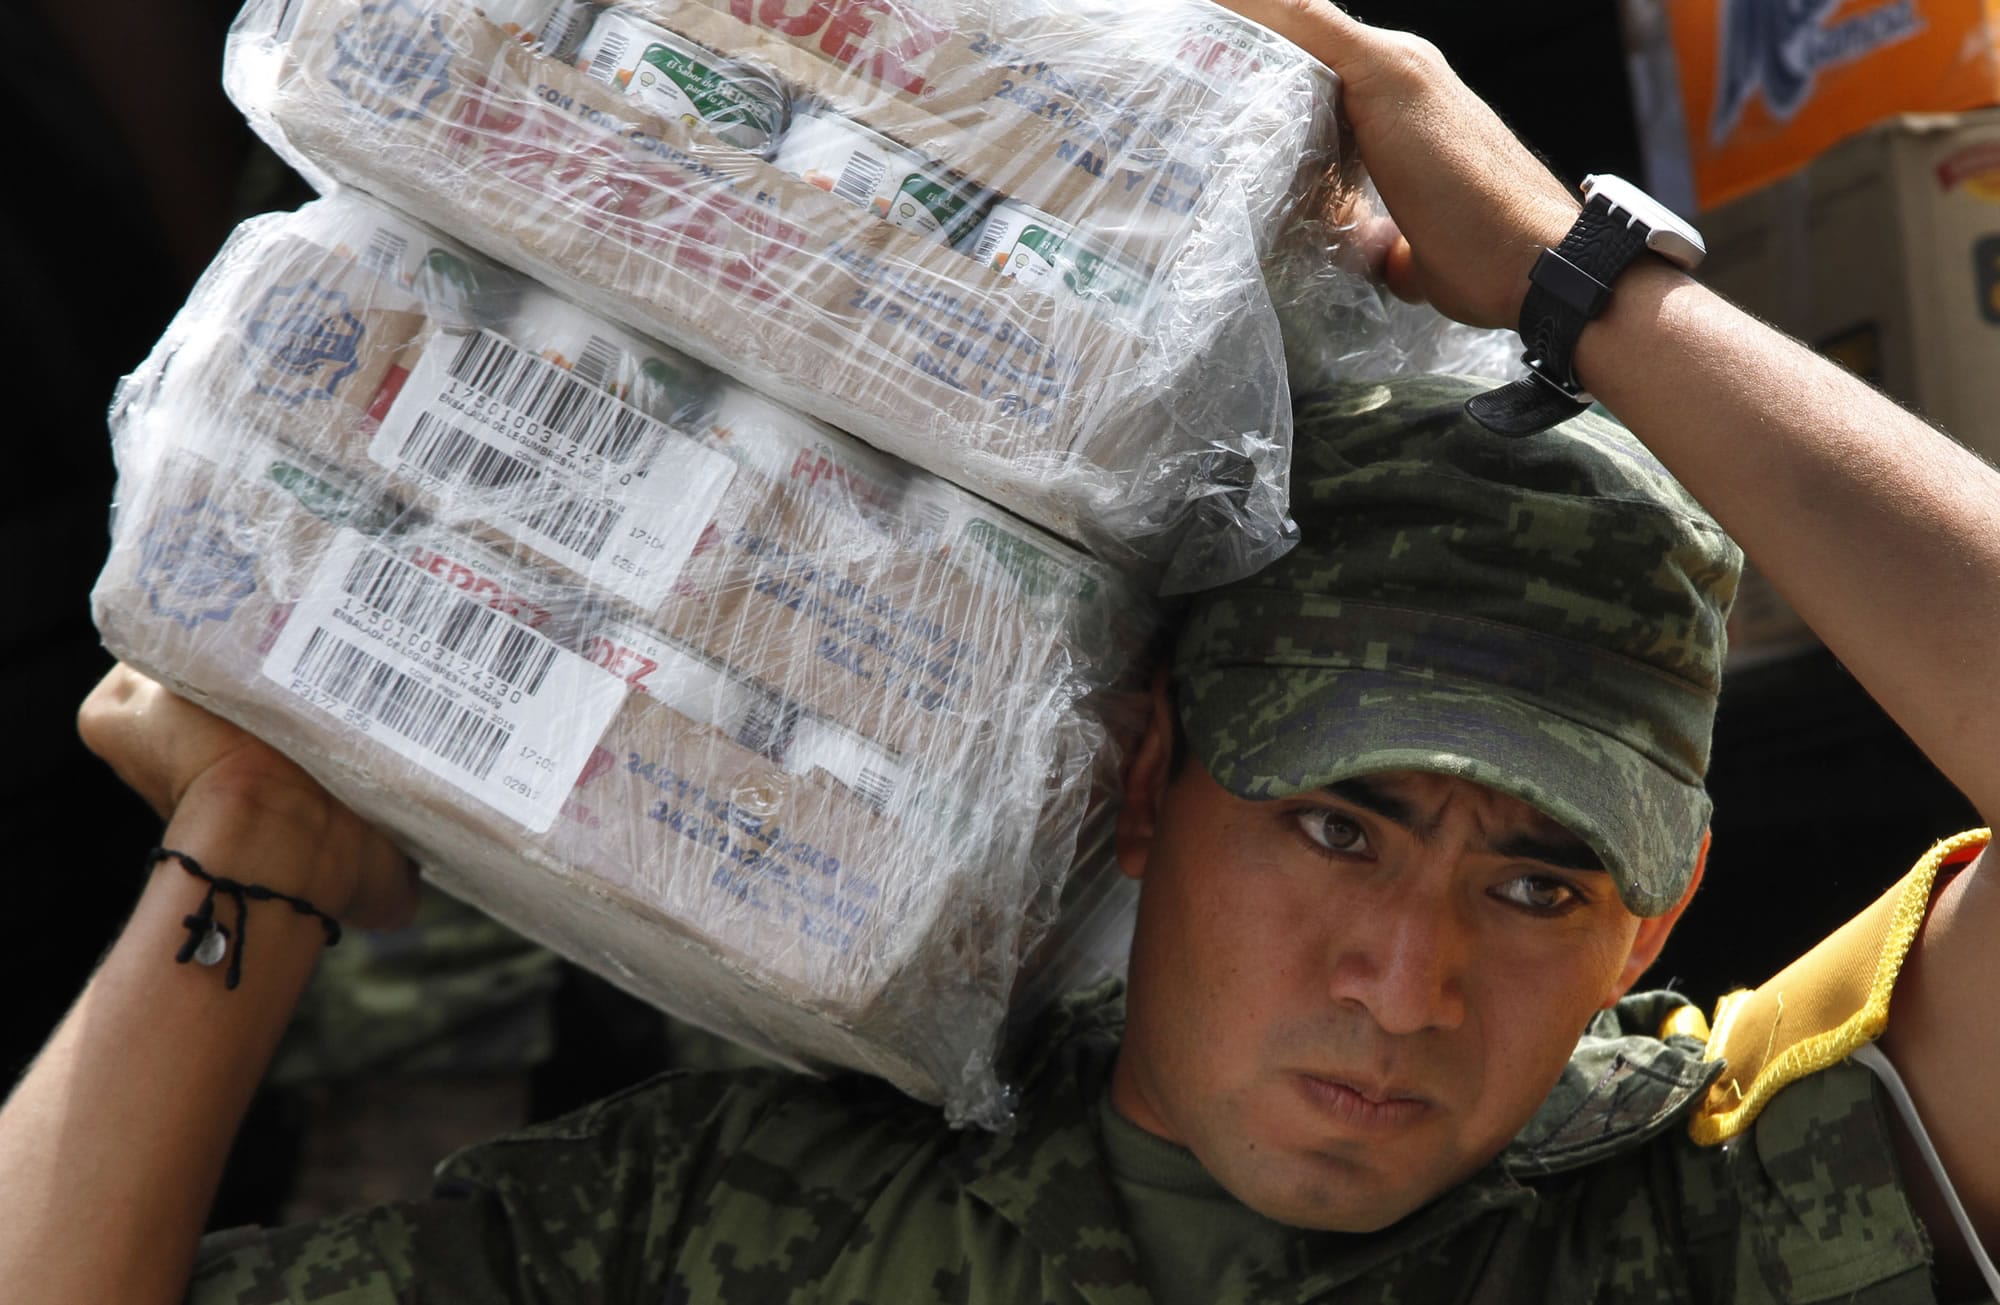 A soldier carries cartons of canned vegeatables Friday as part of the humanitarian aid bound for storm victims of Tropical Storm Manuel, in Mexico City.